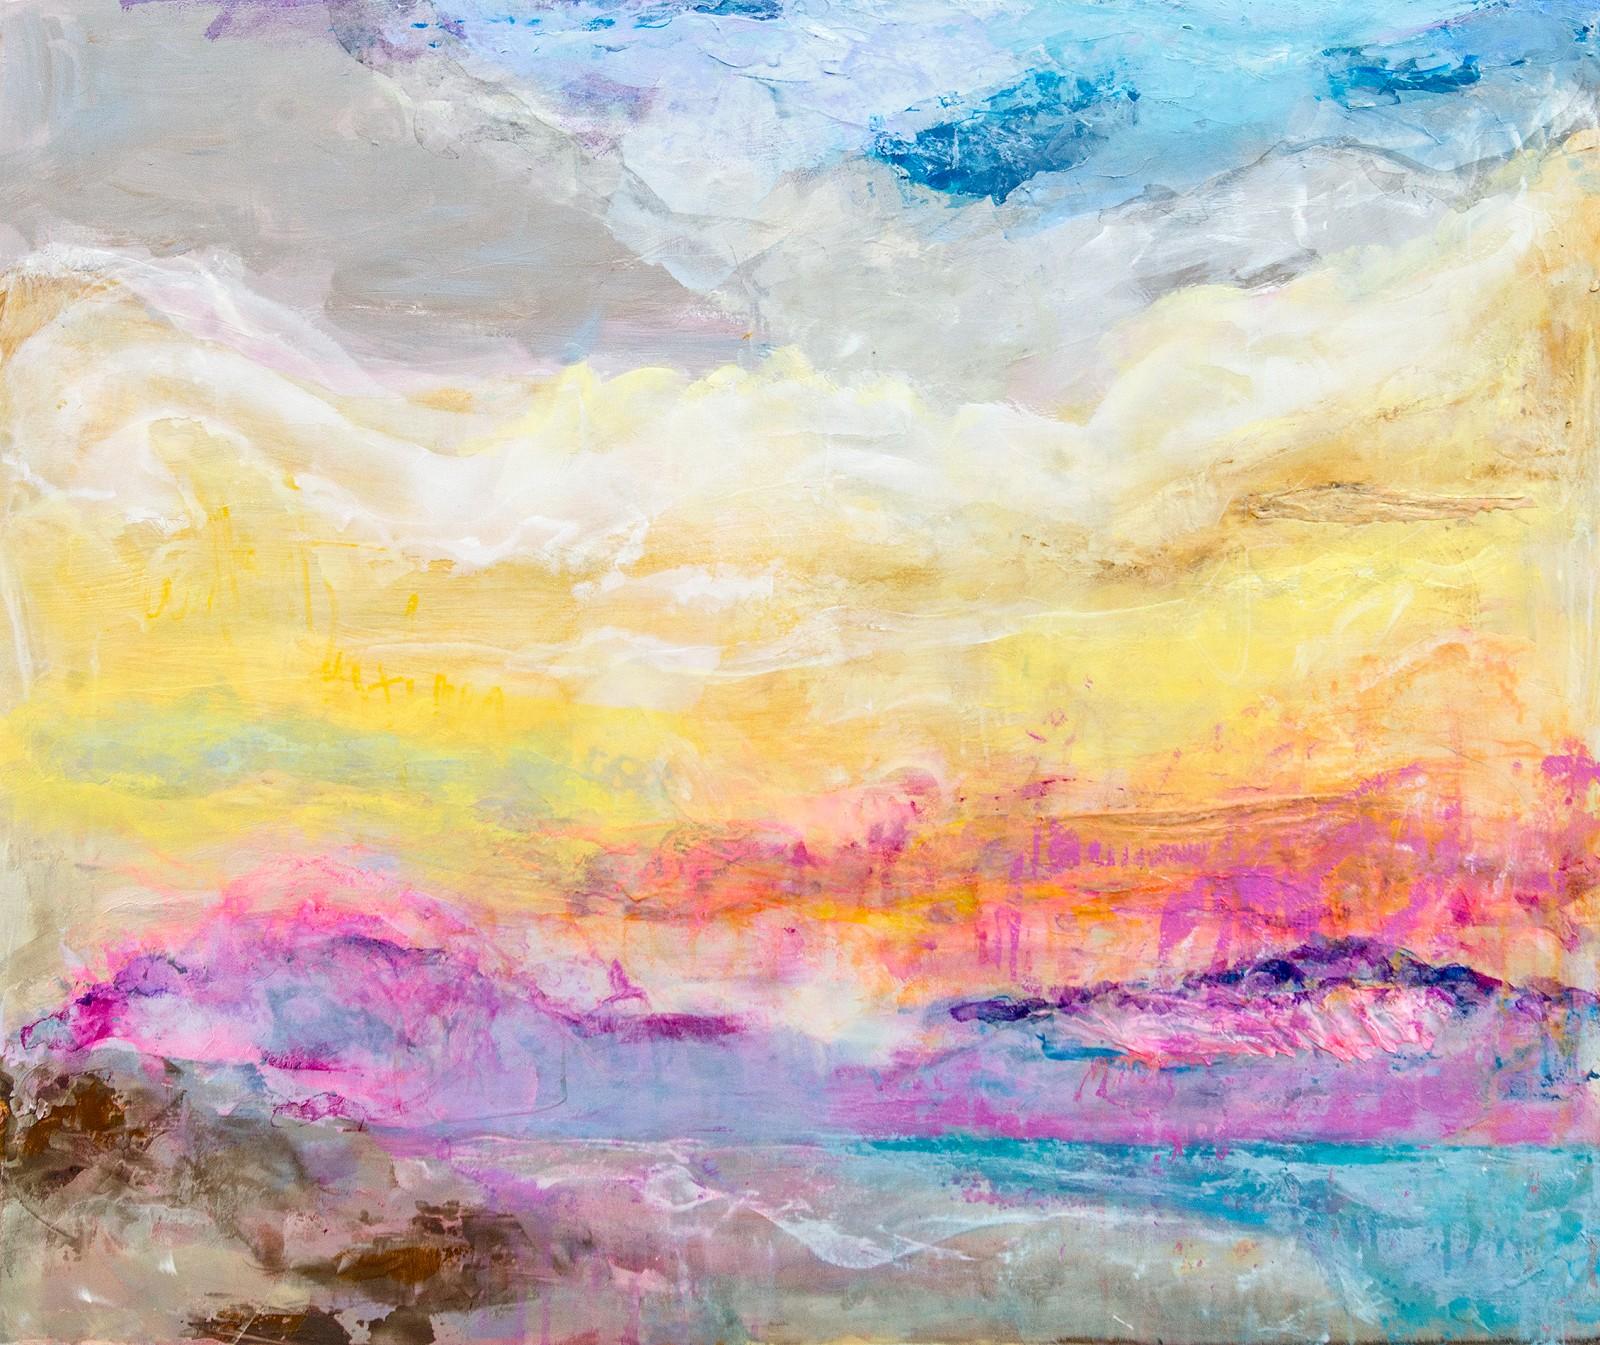 The Sun Set Her Pink - textured, vibrant, abstract, acrylic on canvas